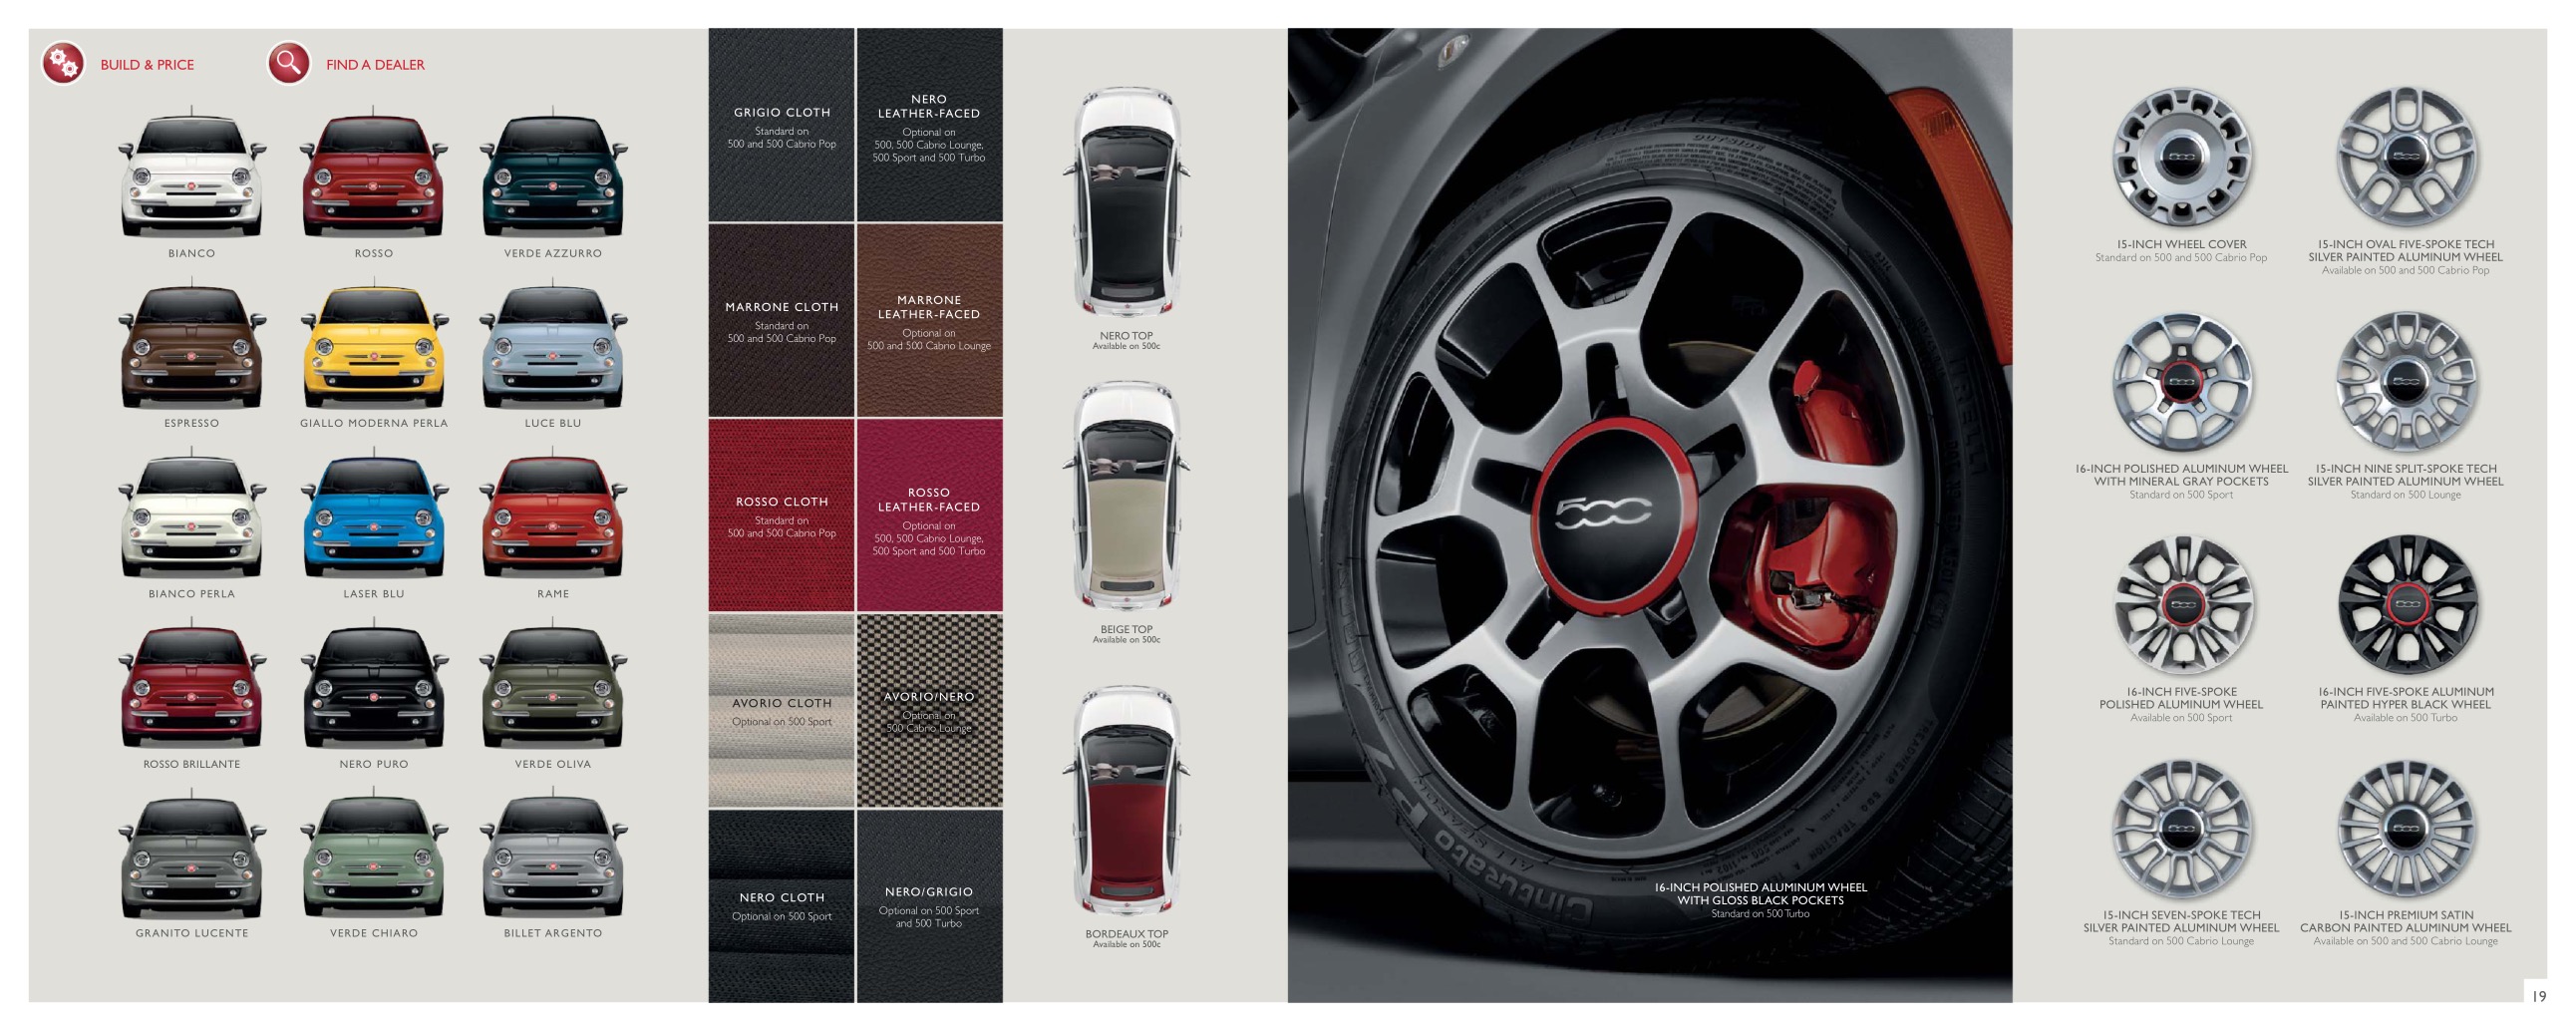 2015 Fiat Full-Line Brochure Page 26